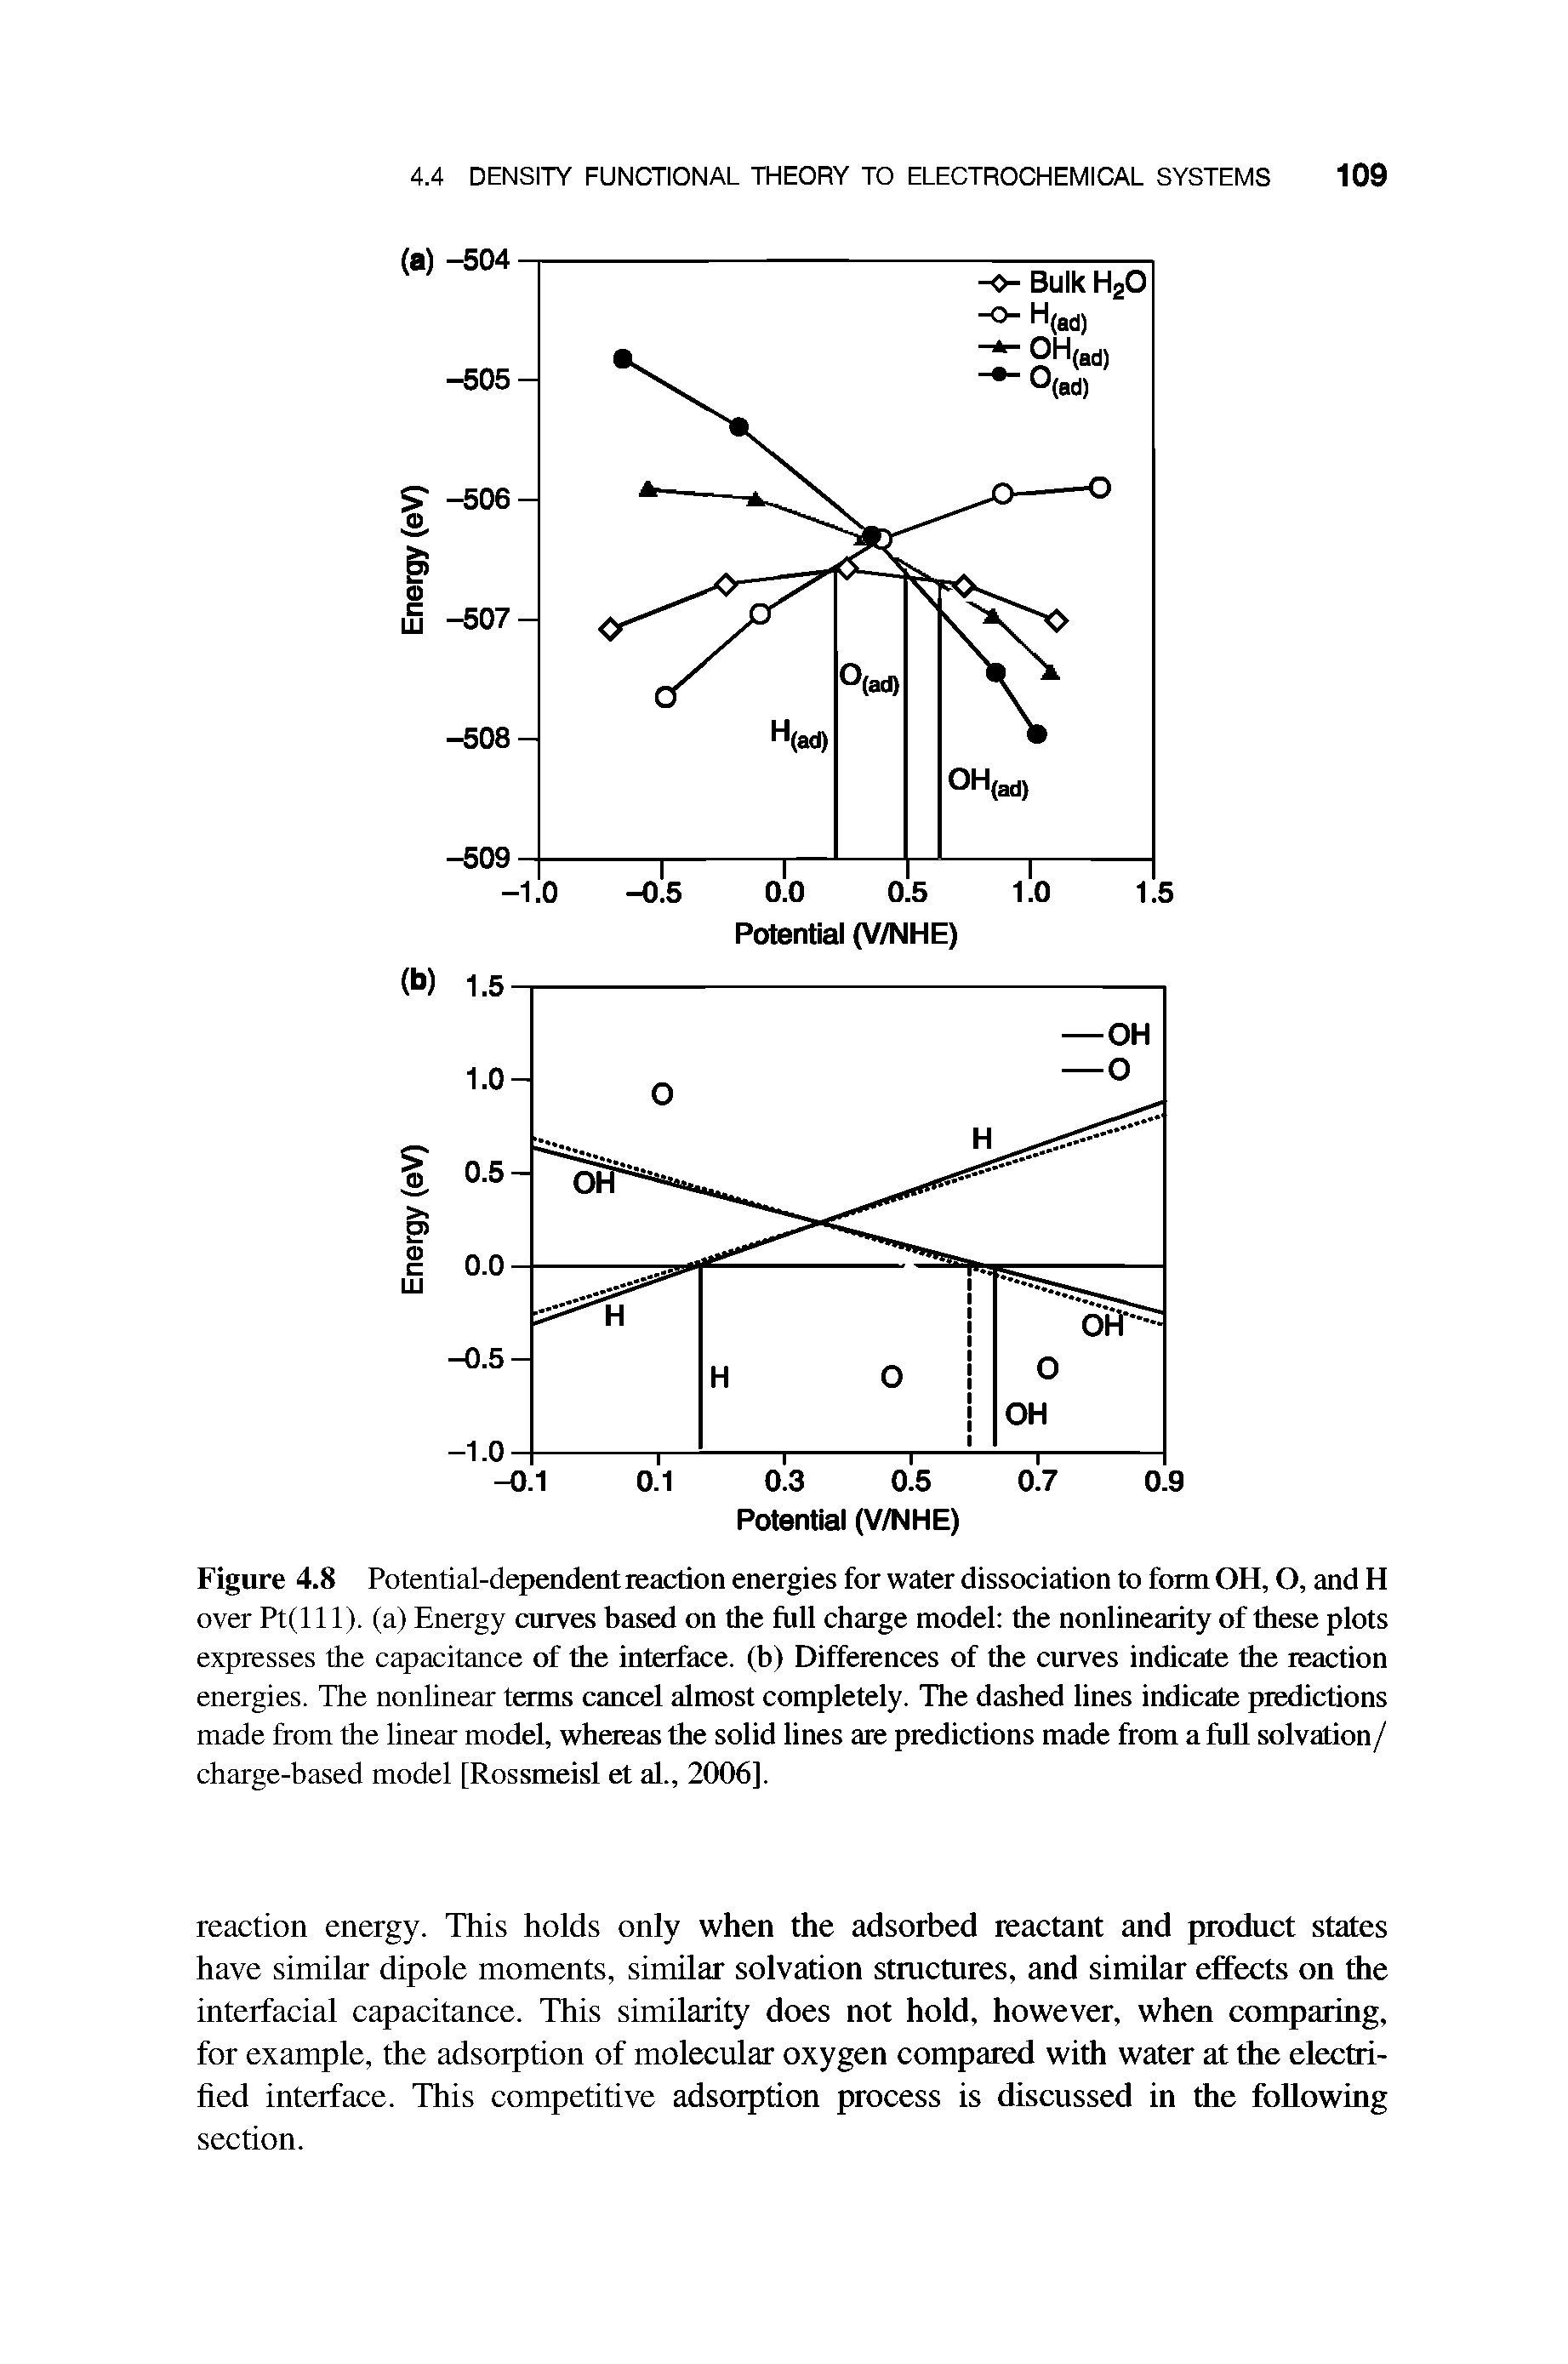 Figure 4.8 Potential-dependent reaction energies for water dissociation to form OH, O, and H over Pt(l 11). (a) Energy curves based on the full charge model the nonlinearity of these plots expresses the capacitance of the interface, (b) Differences of the curves indicate the reaction energies. The nonlinear terms cancel almost completely. The dashed lines indicate predictions made from the linear model, whereas the solid lines are predictions made from a fuU solvation/ charge-based model [Rossmeisl et al., 2006].